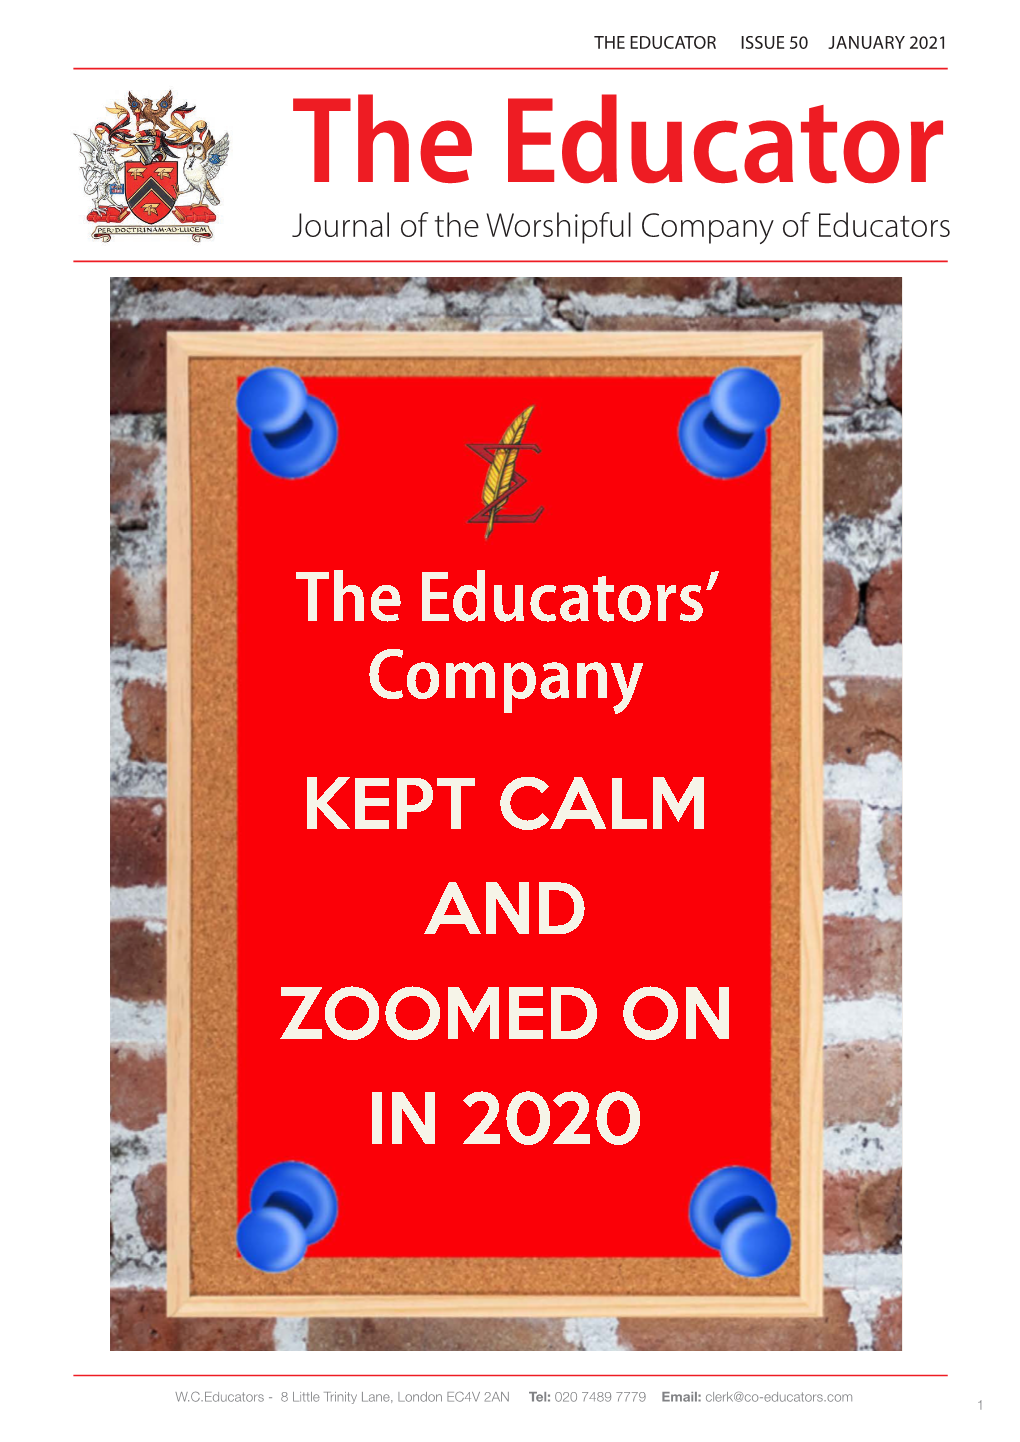 THE EDUCATOR ISSUE 50 JANUARY 2021 the Educator Journal of the Worshipful Company of Educators